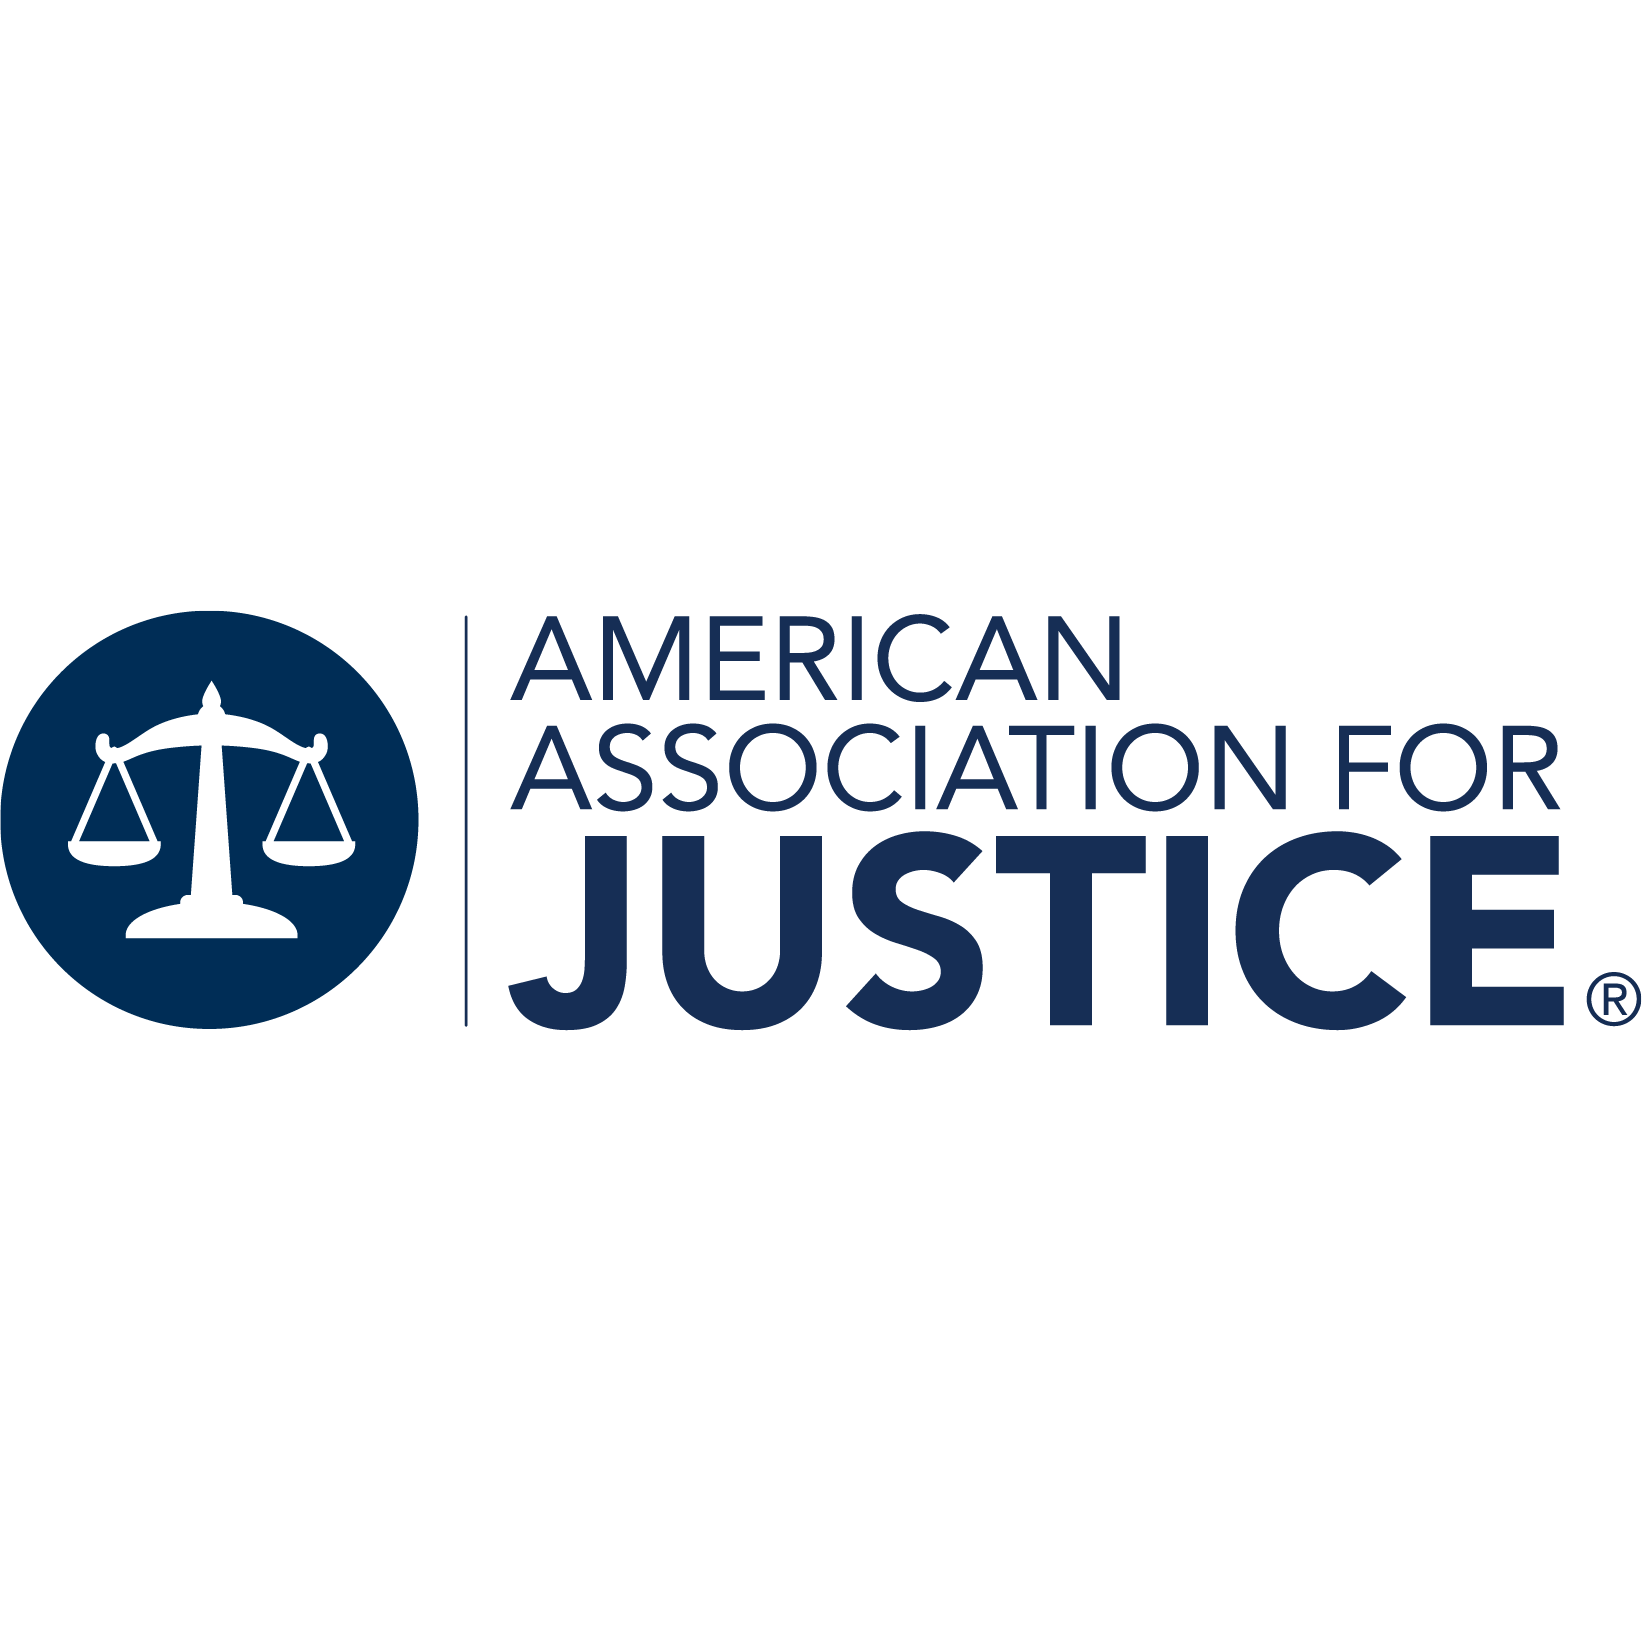 American Association for Justice (AAJ)